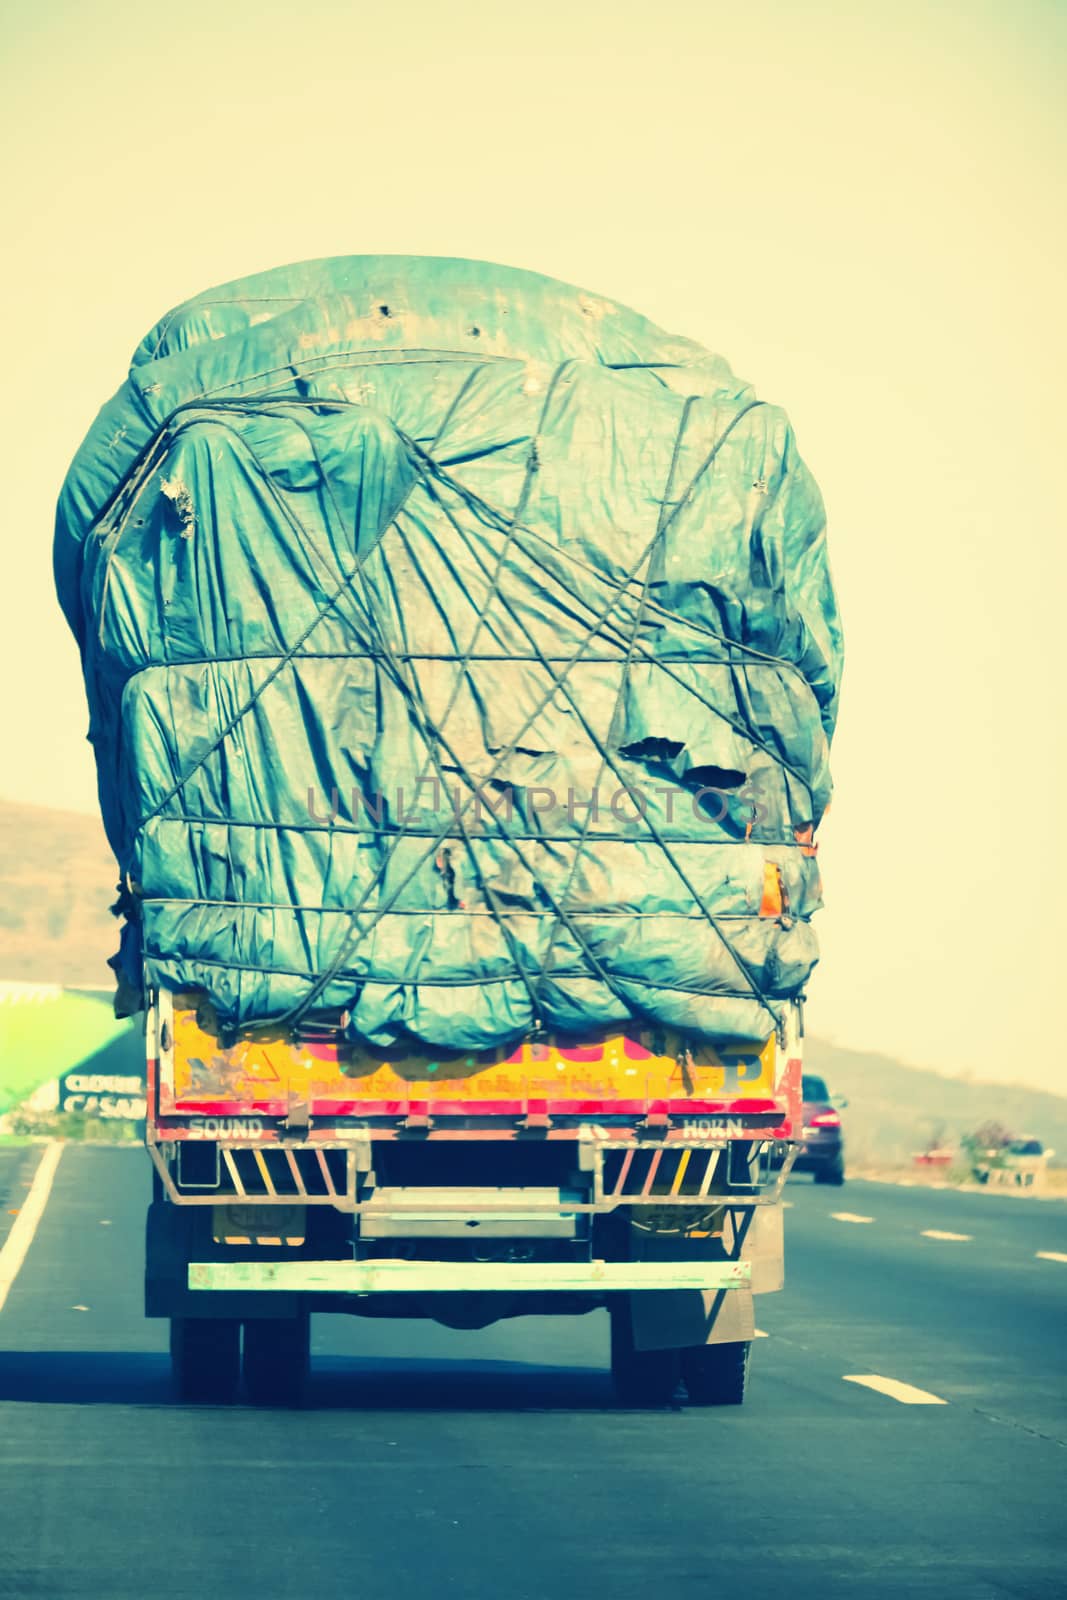 Overloaded lorry  by yands